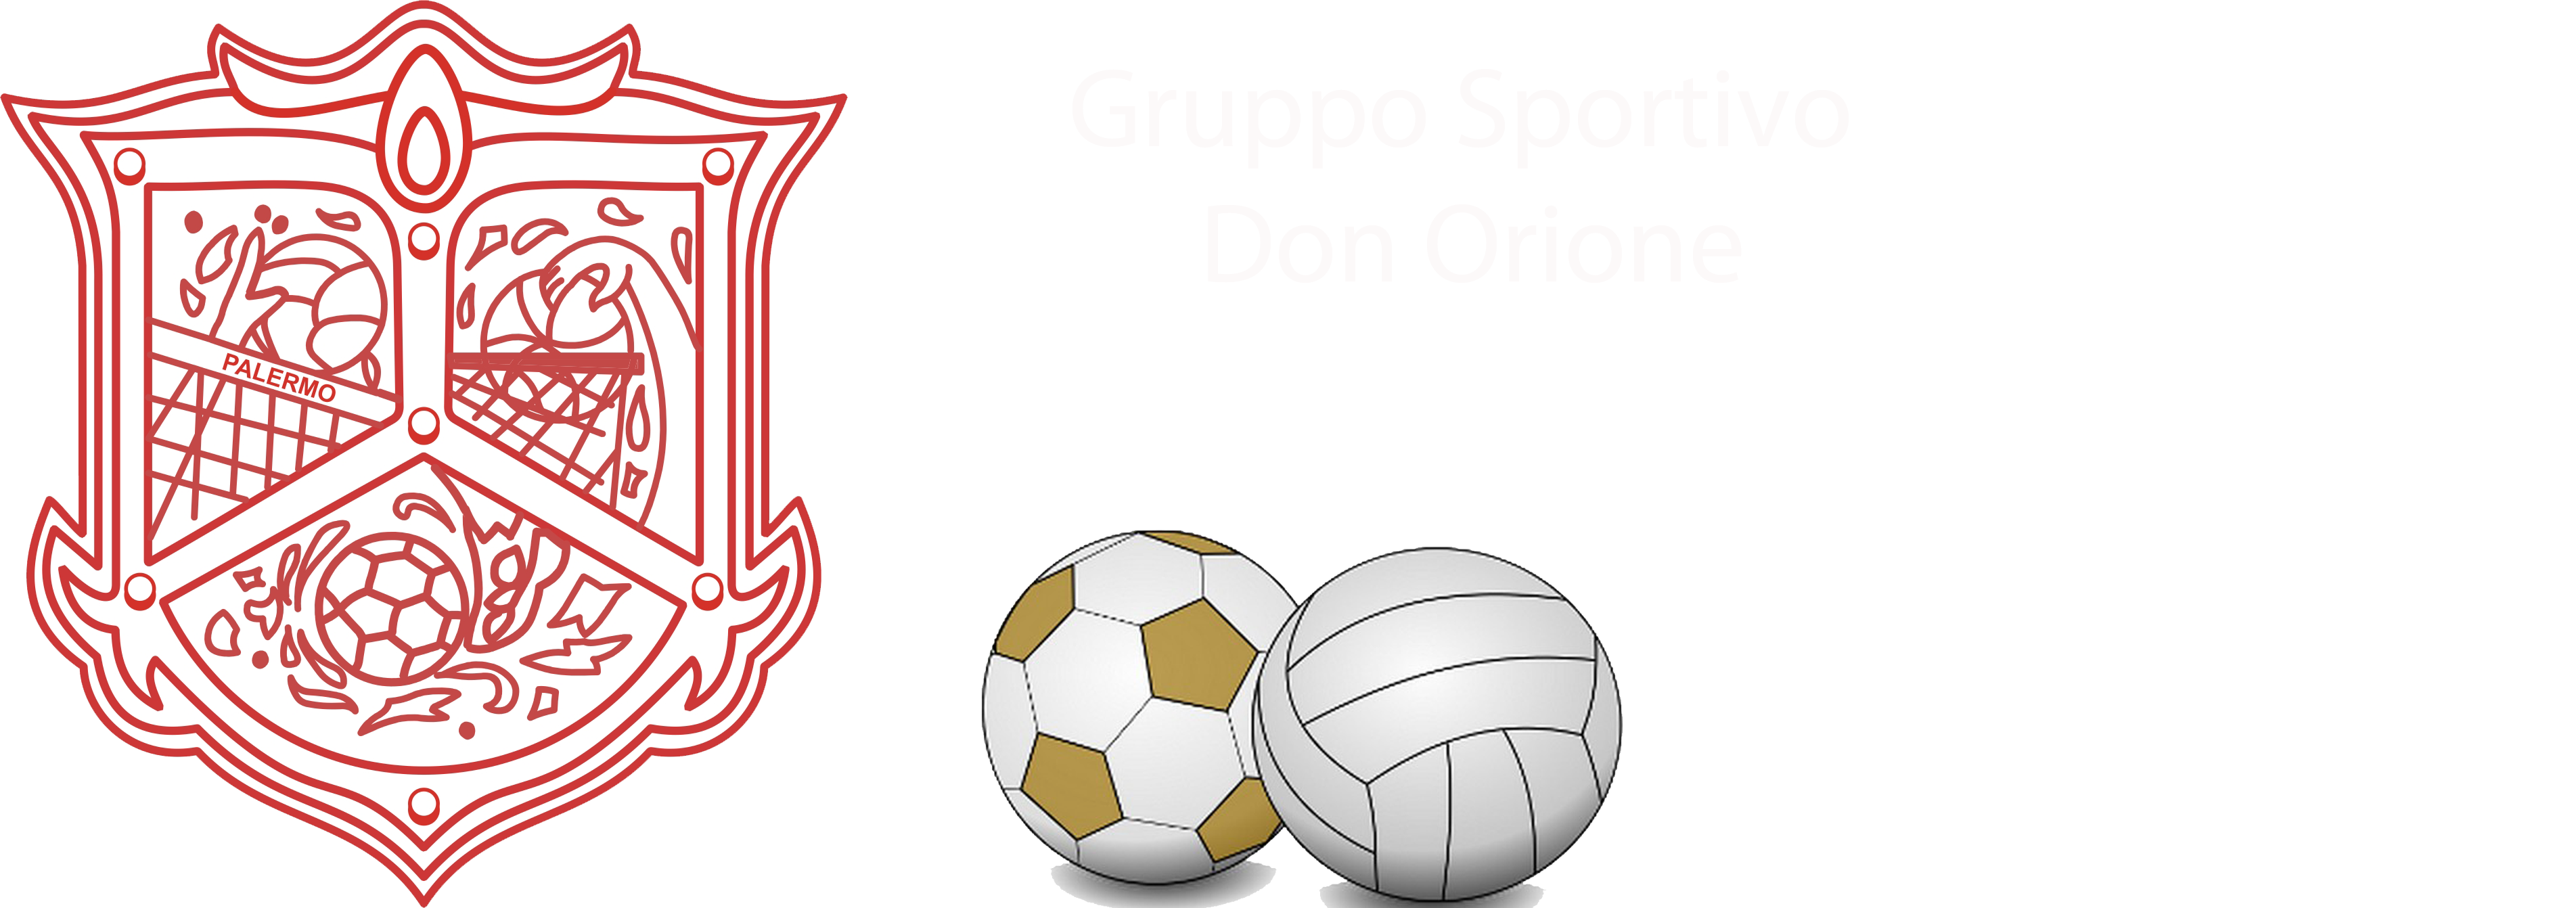 G.S. Don Orione